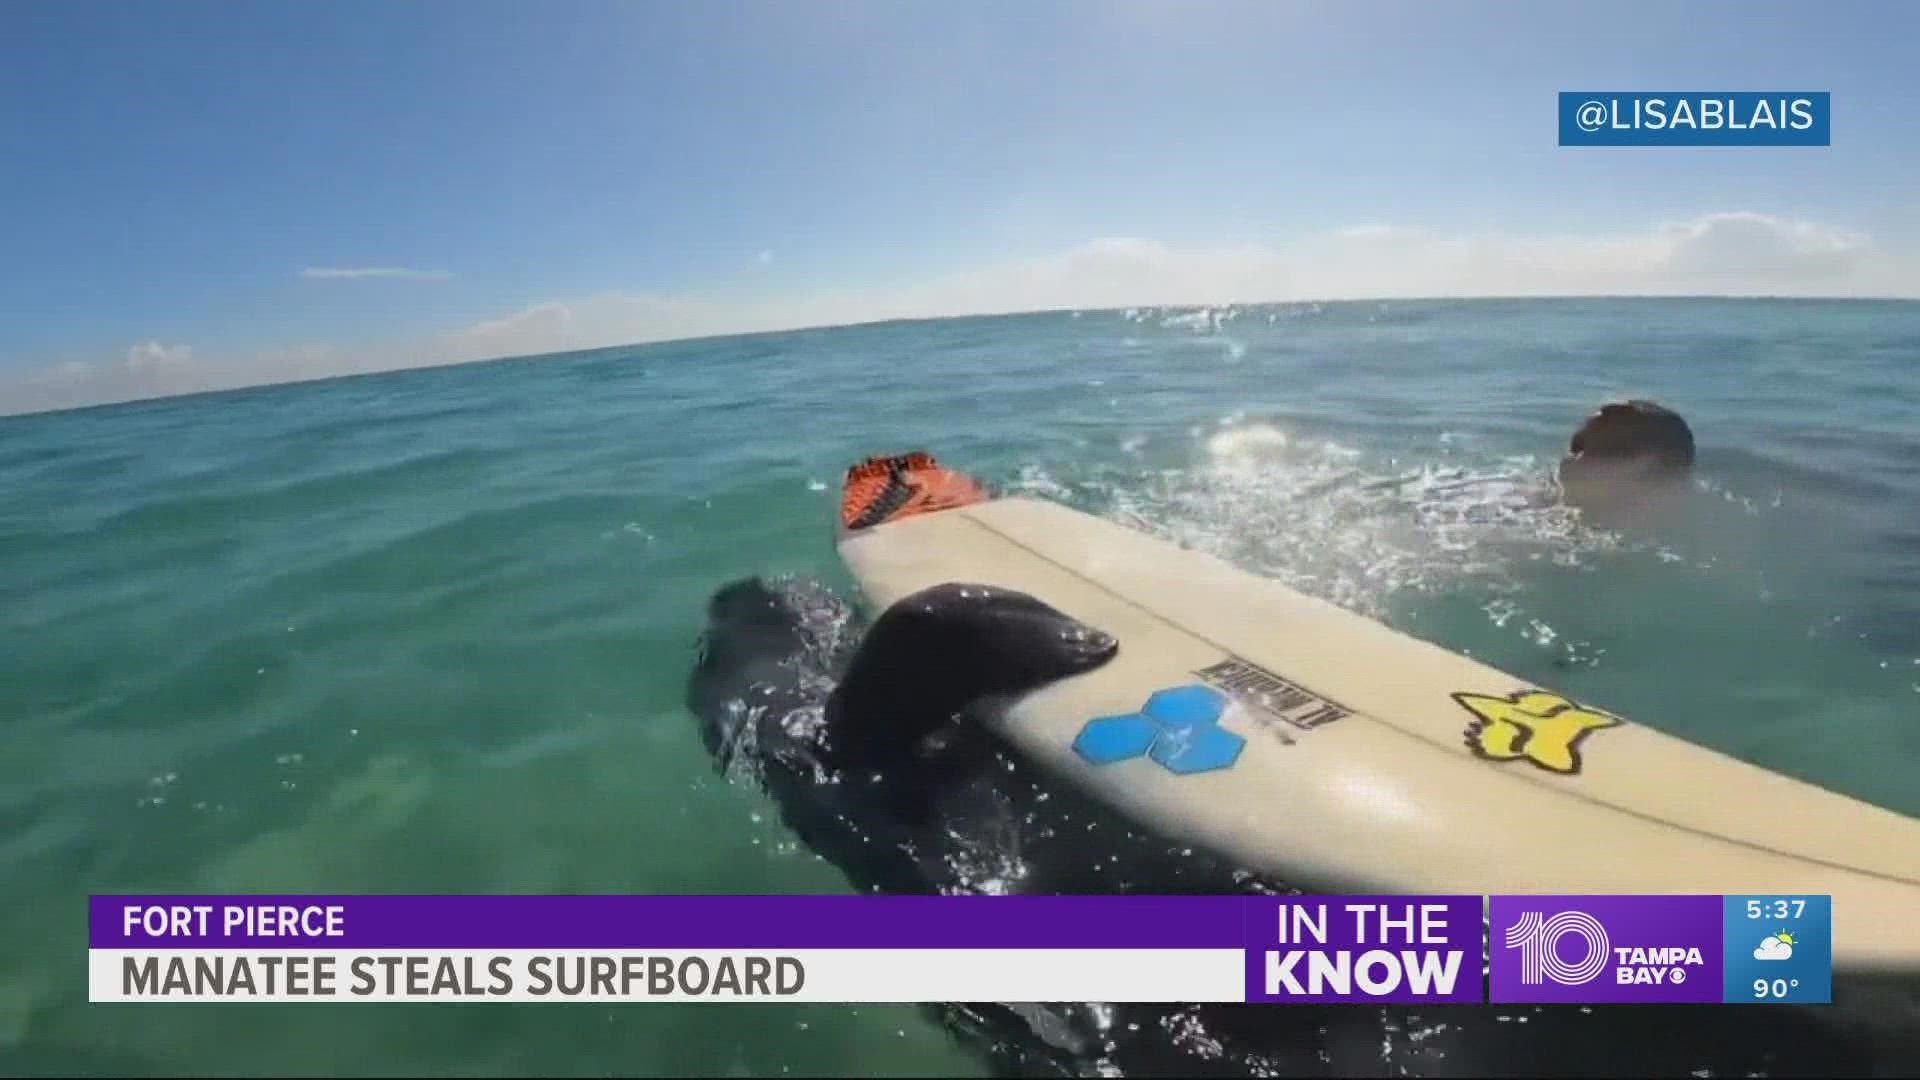 A group of manatees swam up on the surfers and they weren't sure what the figures were... divers? A shark?